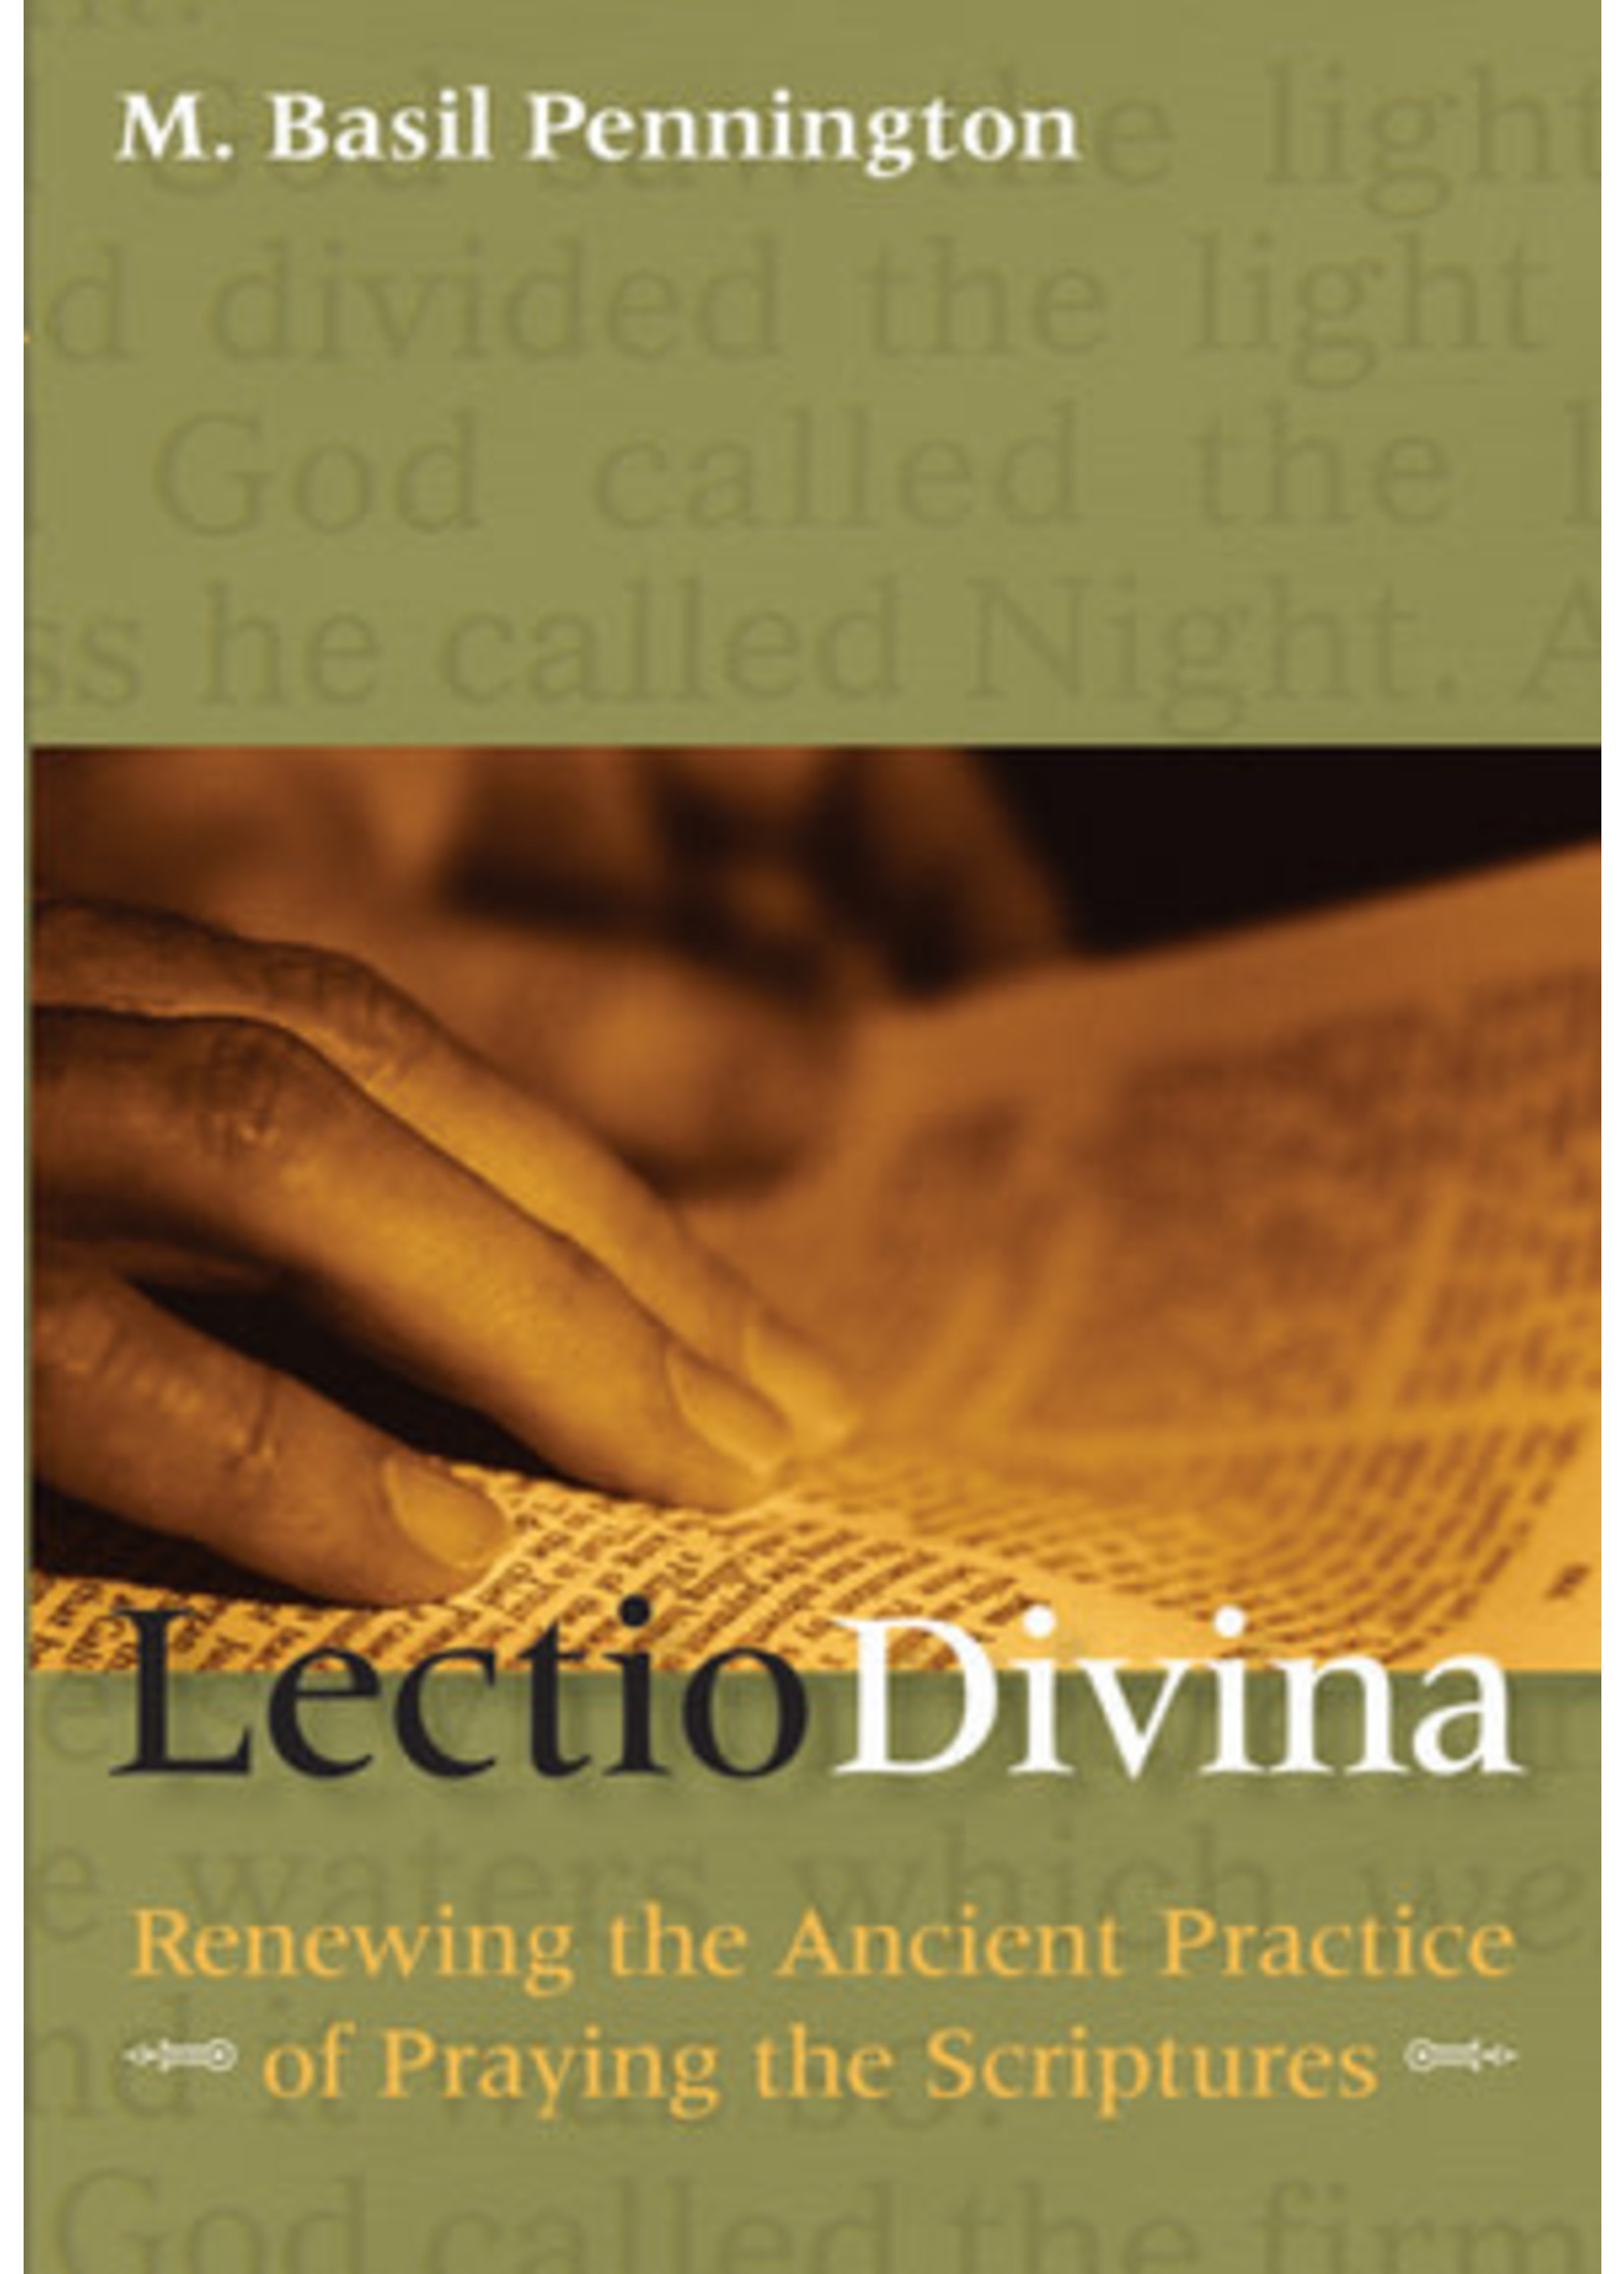 Lectio Divina Renewing the Ancient Practice of Praying the Scriptures